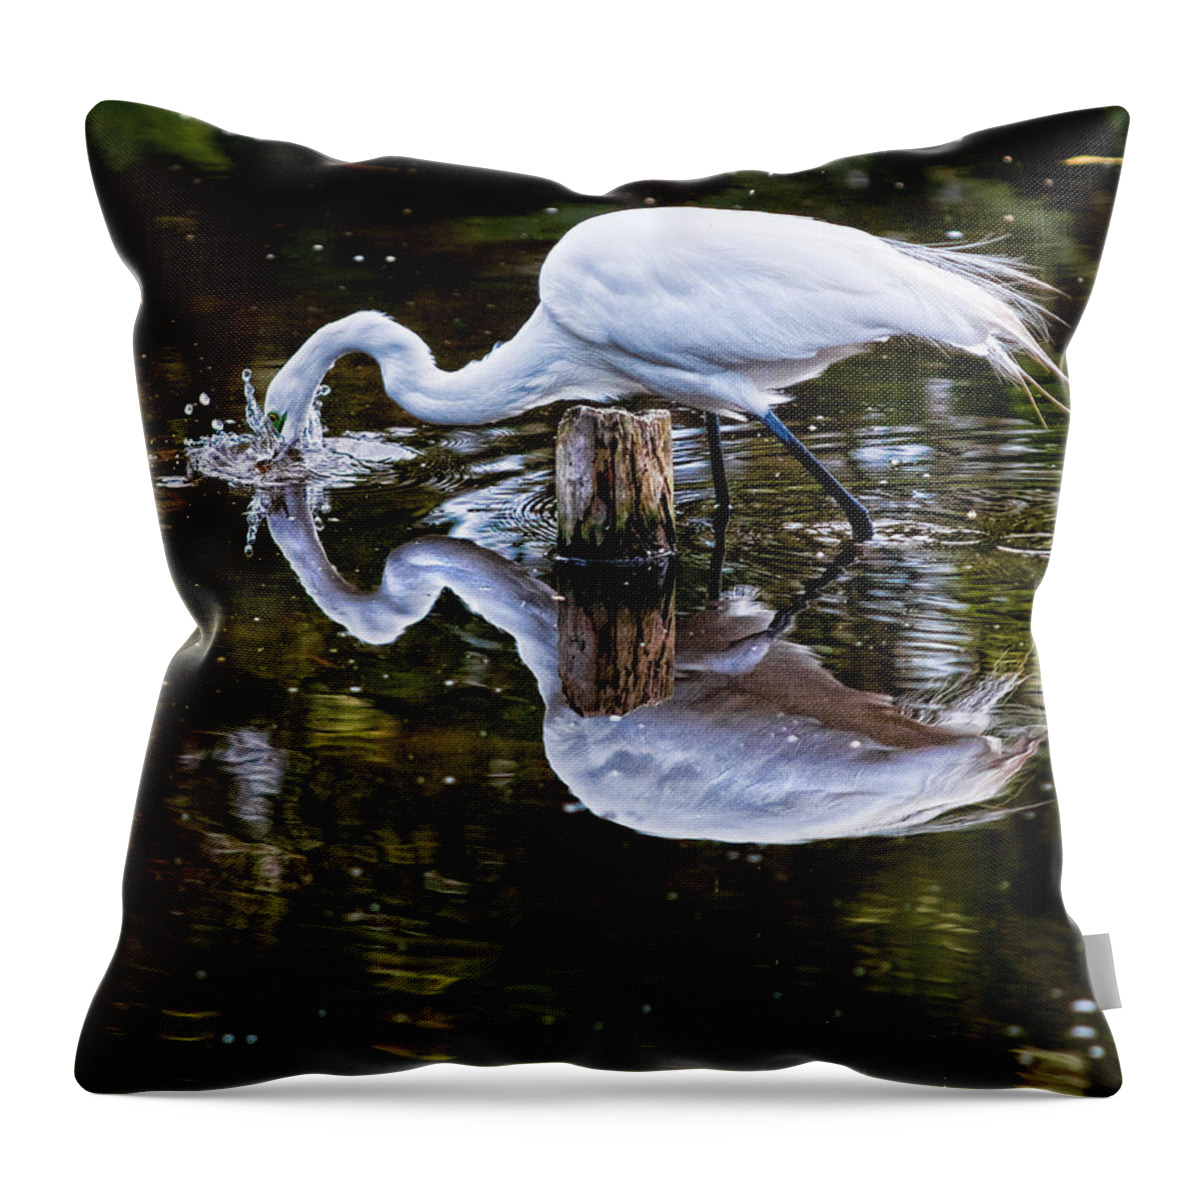 Art Throw Pillow featuring the photograph Strike by Christopher Holmes